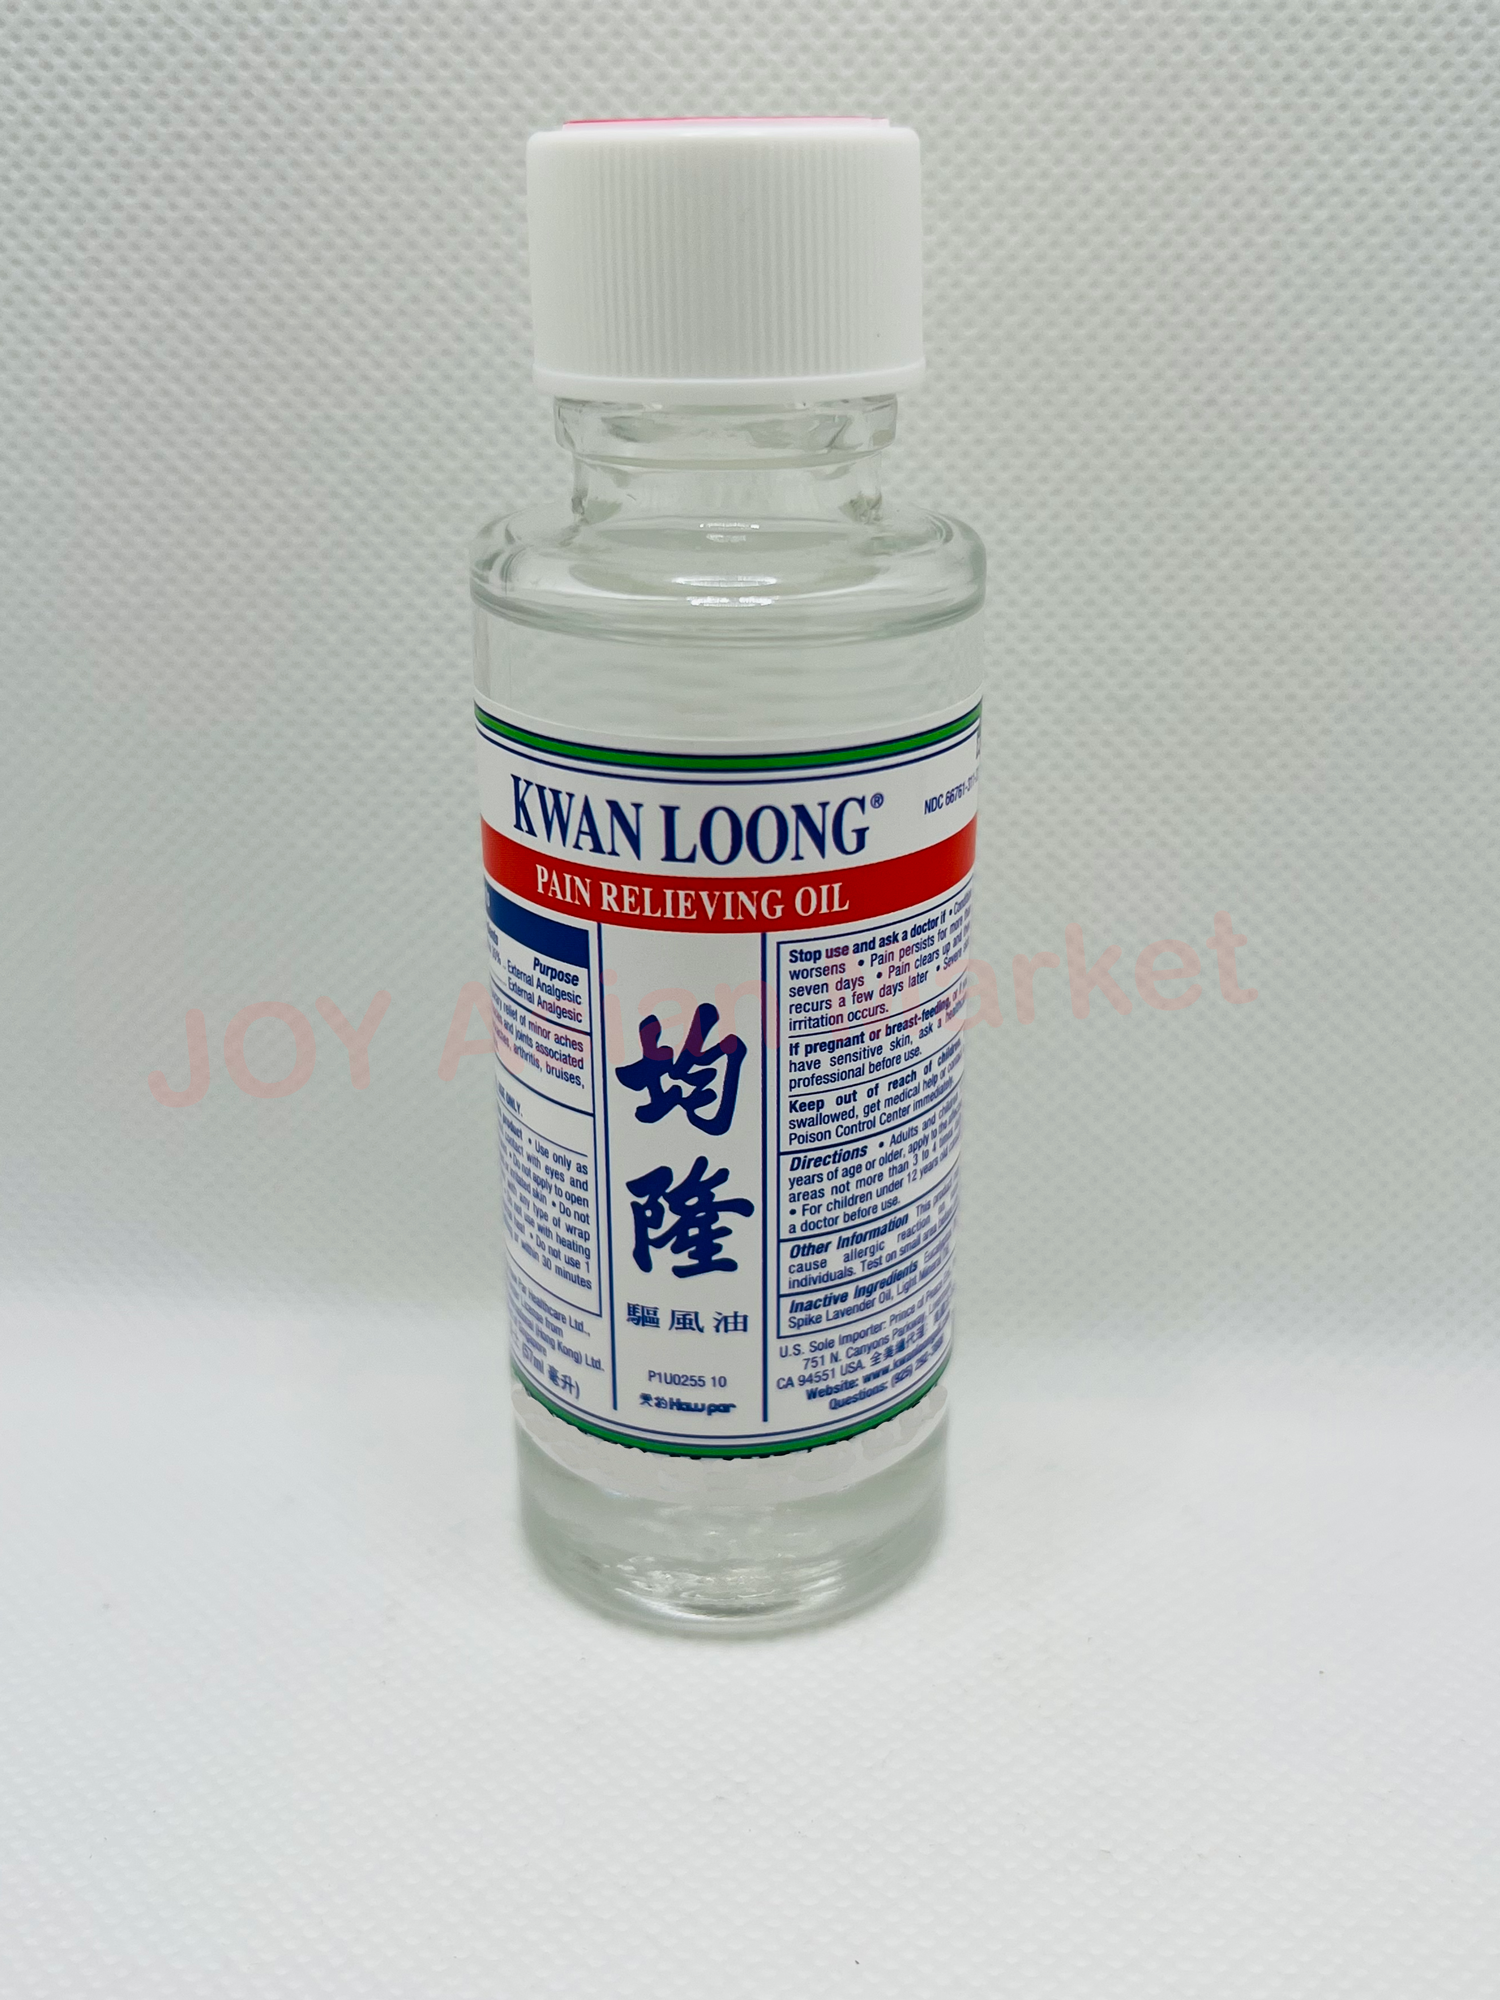 Kwan Loong Pain Relieving Medicated Oil, 2 oz. India